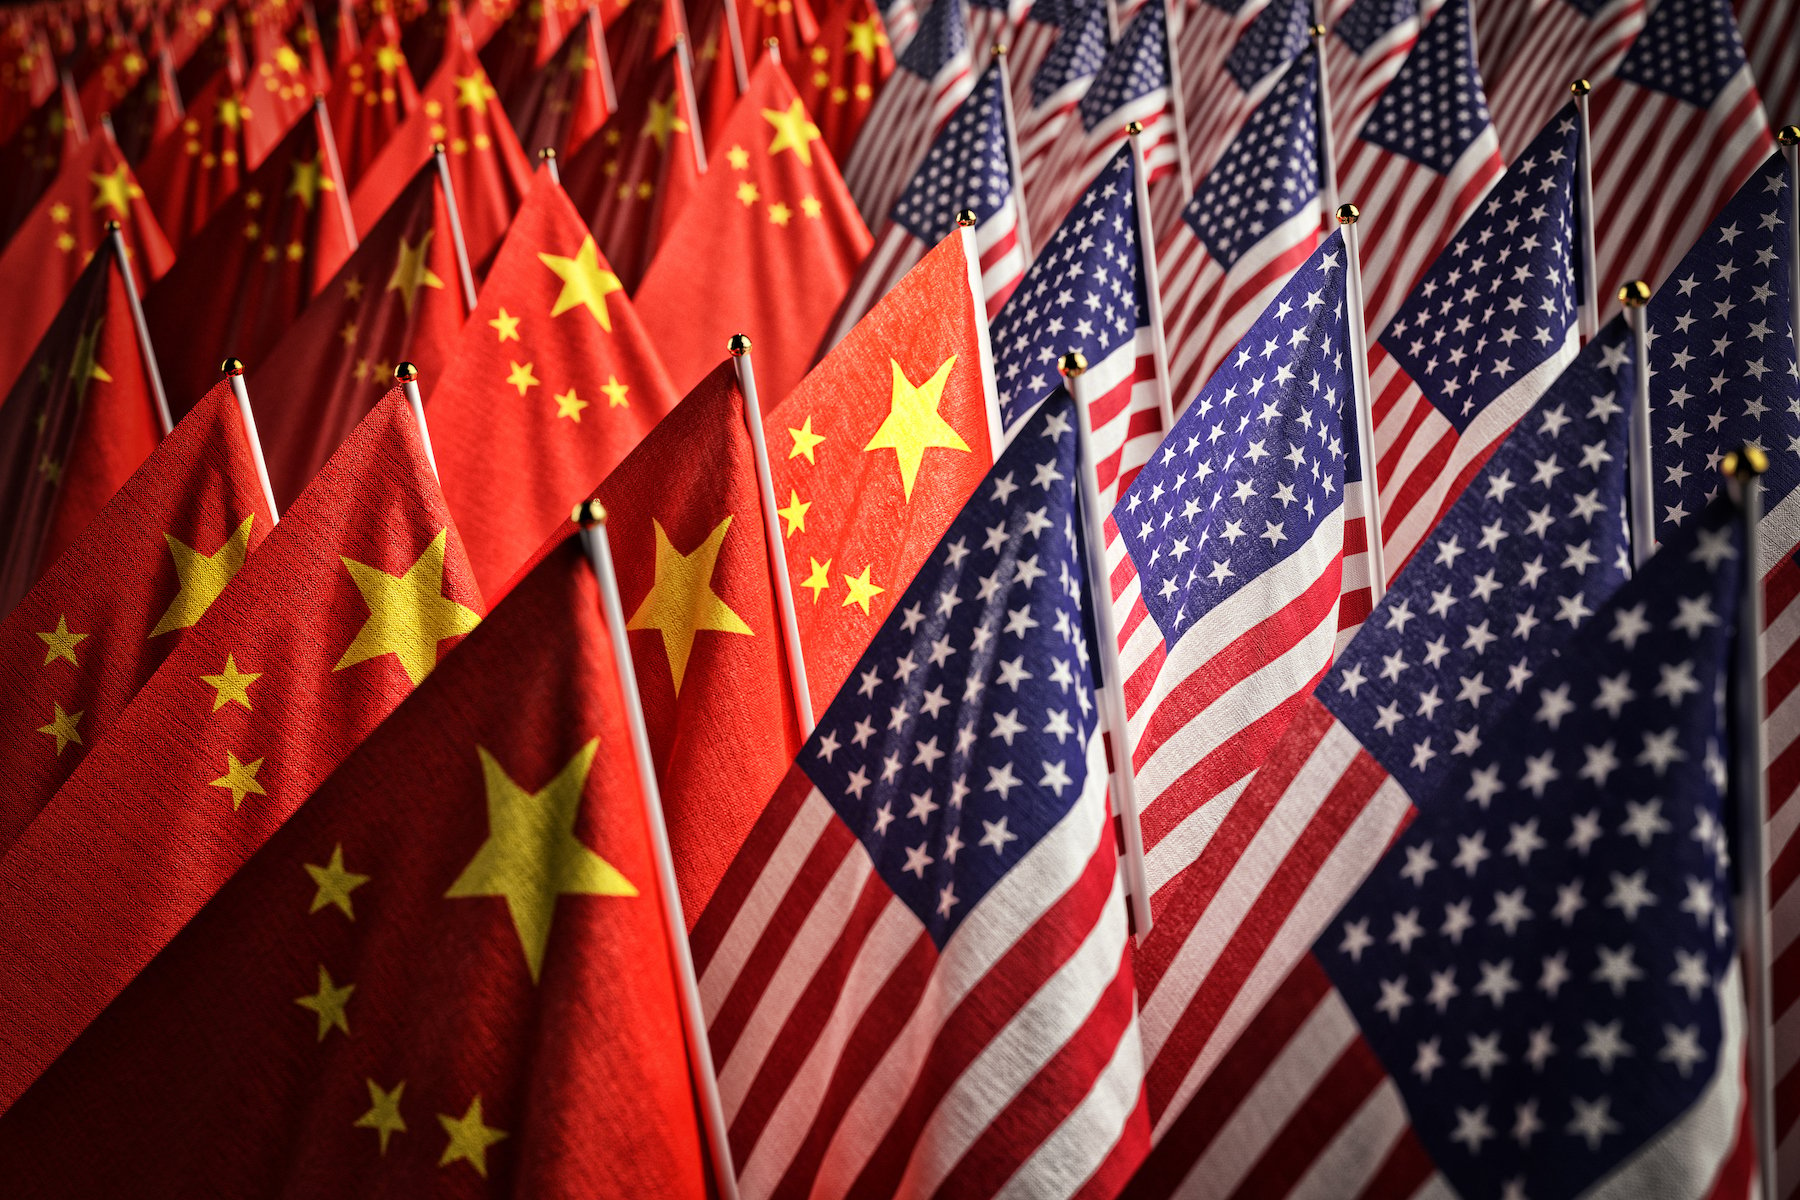 graphic image of China flags overlapping with US flags